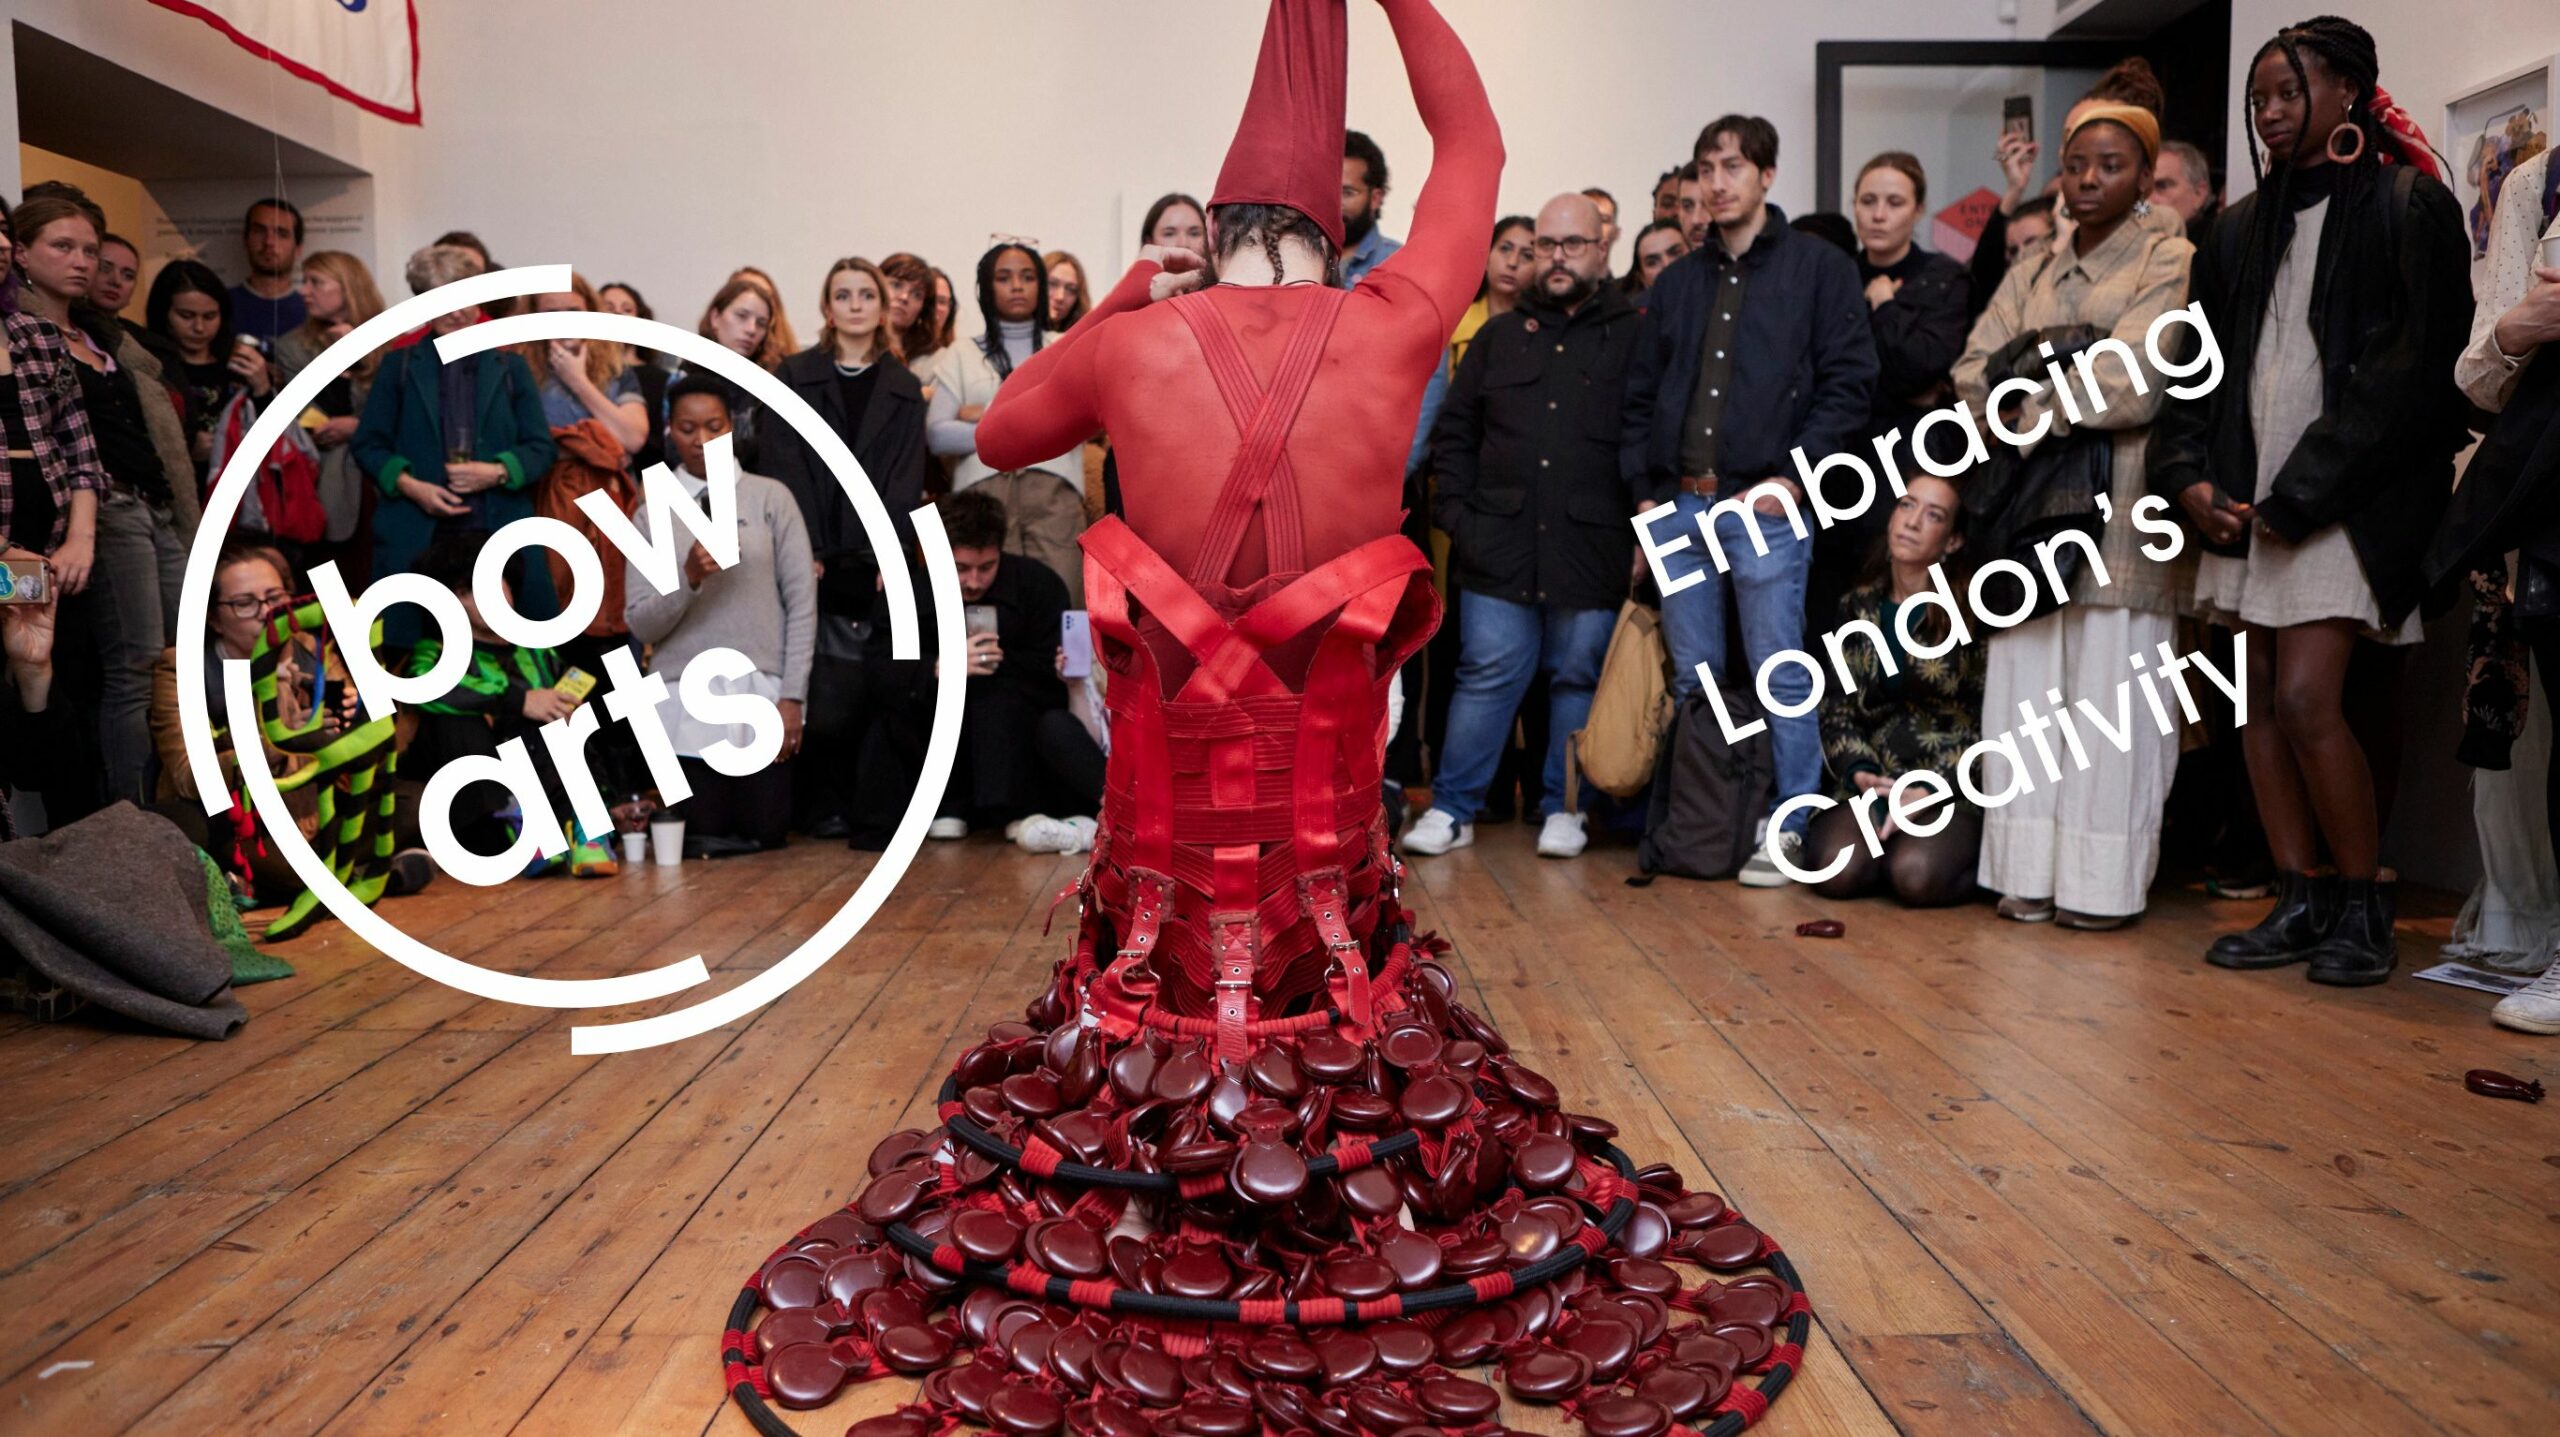 Spectators observe a performance of a person undressing from a castanet dress, the Bow Arts Logo is on the left of the image, Embracing London's Creativity is written on the right